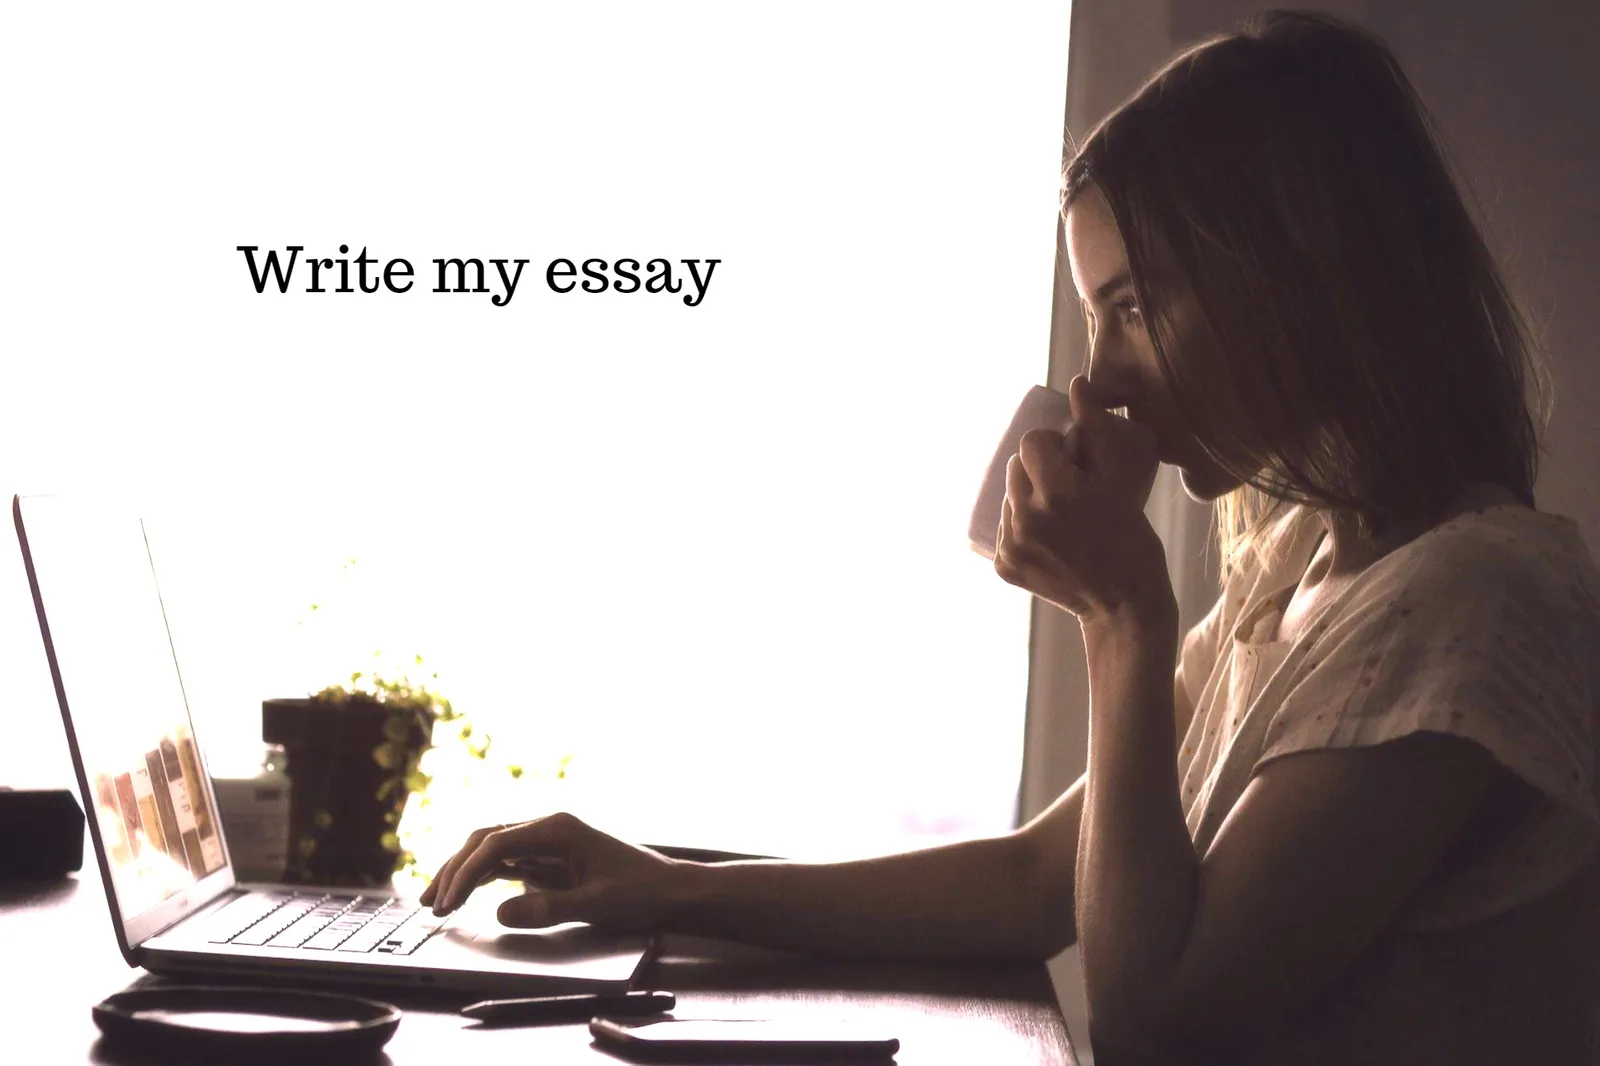 A Simple Plan For academic writing definition